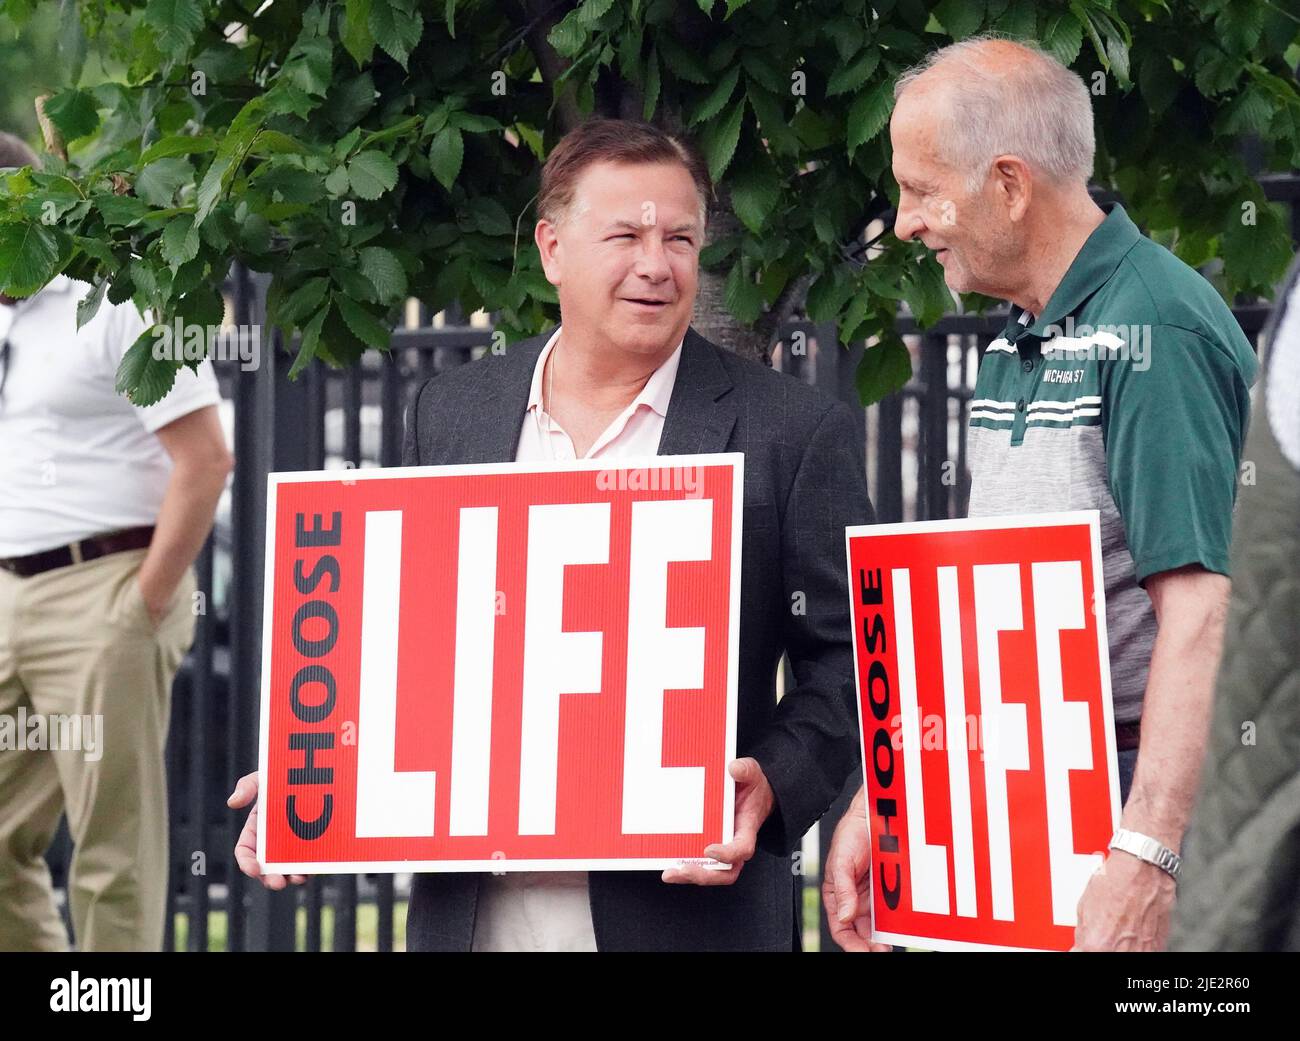 St. Louis, United States. 24th June, 2022. Republican U.S. Senate candidate for Missouri Mark McClosky (L) talks with anti-abortion activists outside of Planned Parenthood hours after the Supreme Court's decision overturning the 1973 Roe v. Wade ruling in St. Louis, Missouri on Friday, June 24, 2022. Missouri Gov. Mike Parson signed a proclamation on June 24, 2022 effectively ending abortion in the state. Photo by Bill Greenblatt/UPI Credit: UPI/Alamy Live News Stock Photo